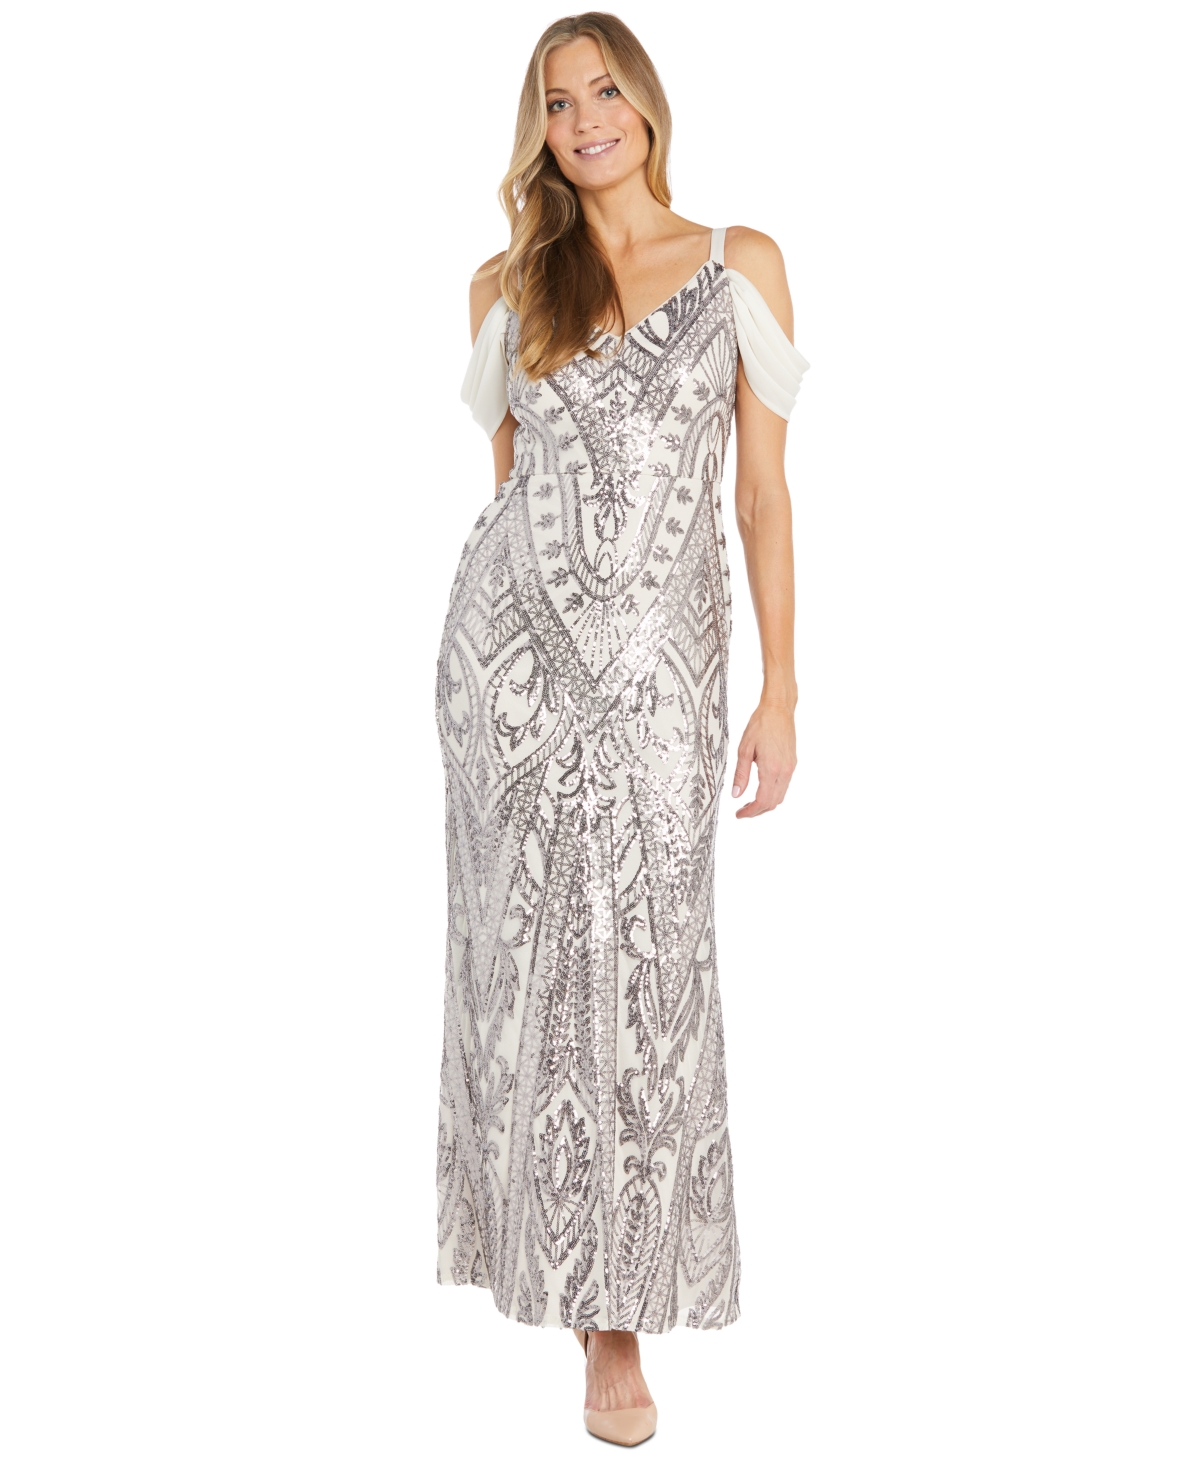 Women's Sequin Embellished Draped Sleeve V-Neck Gown - Ivory/Pewter